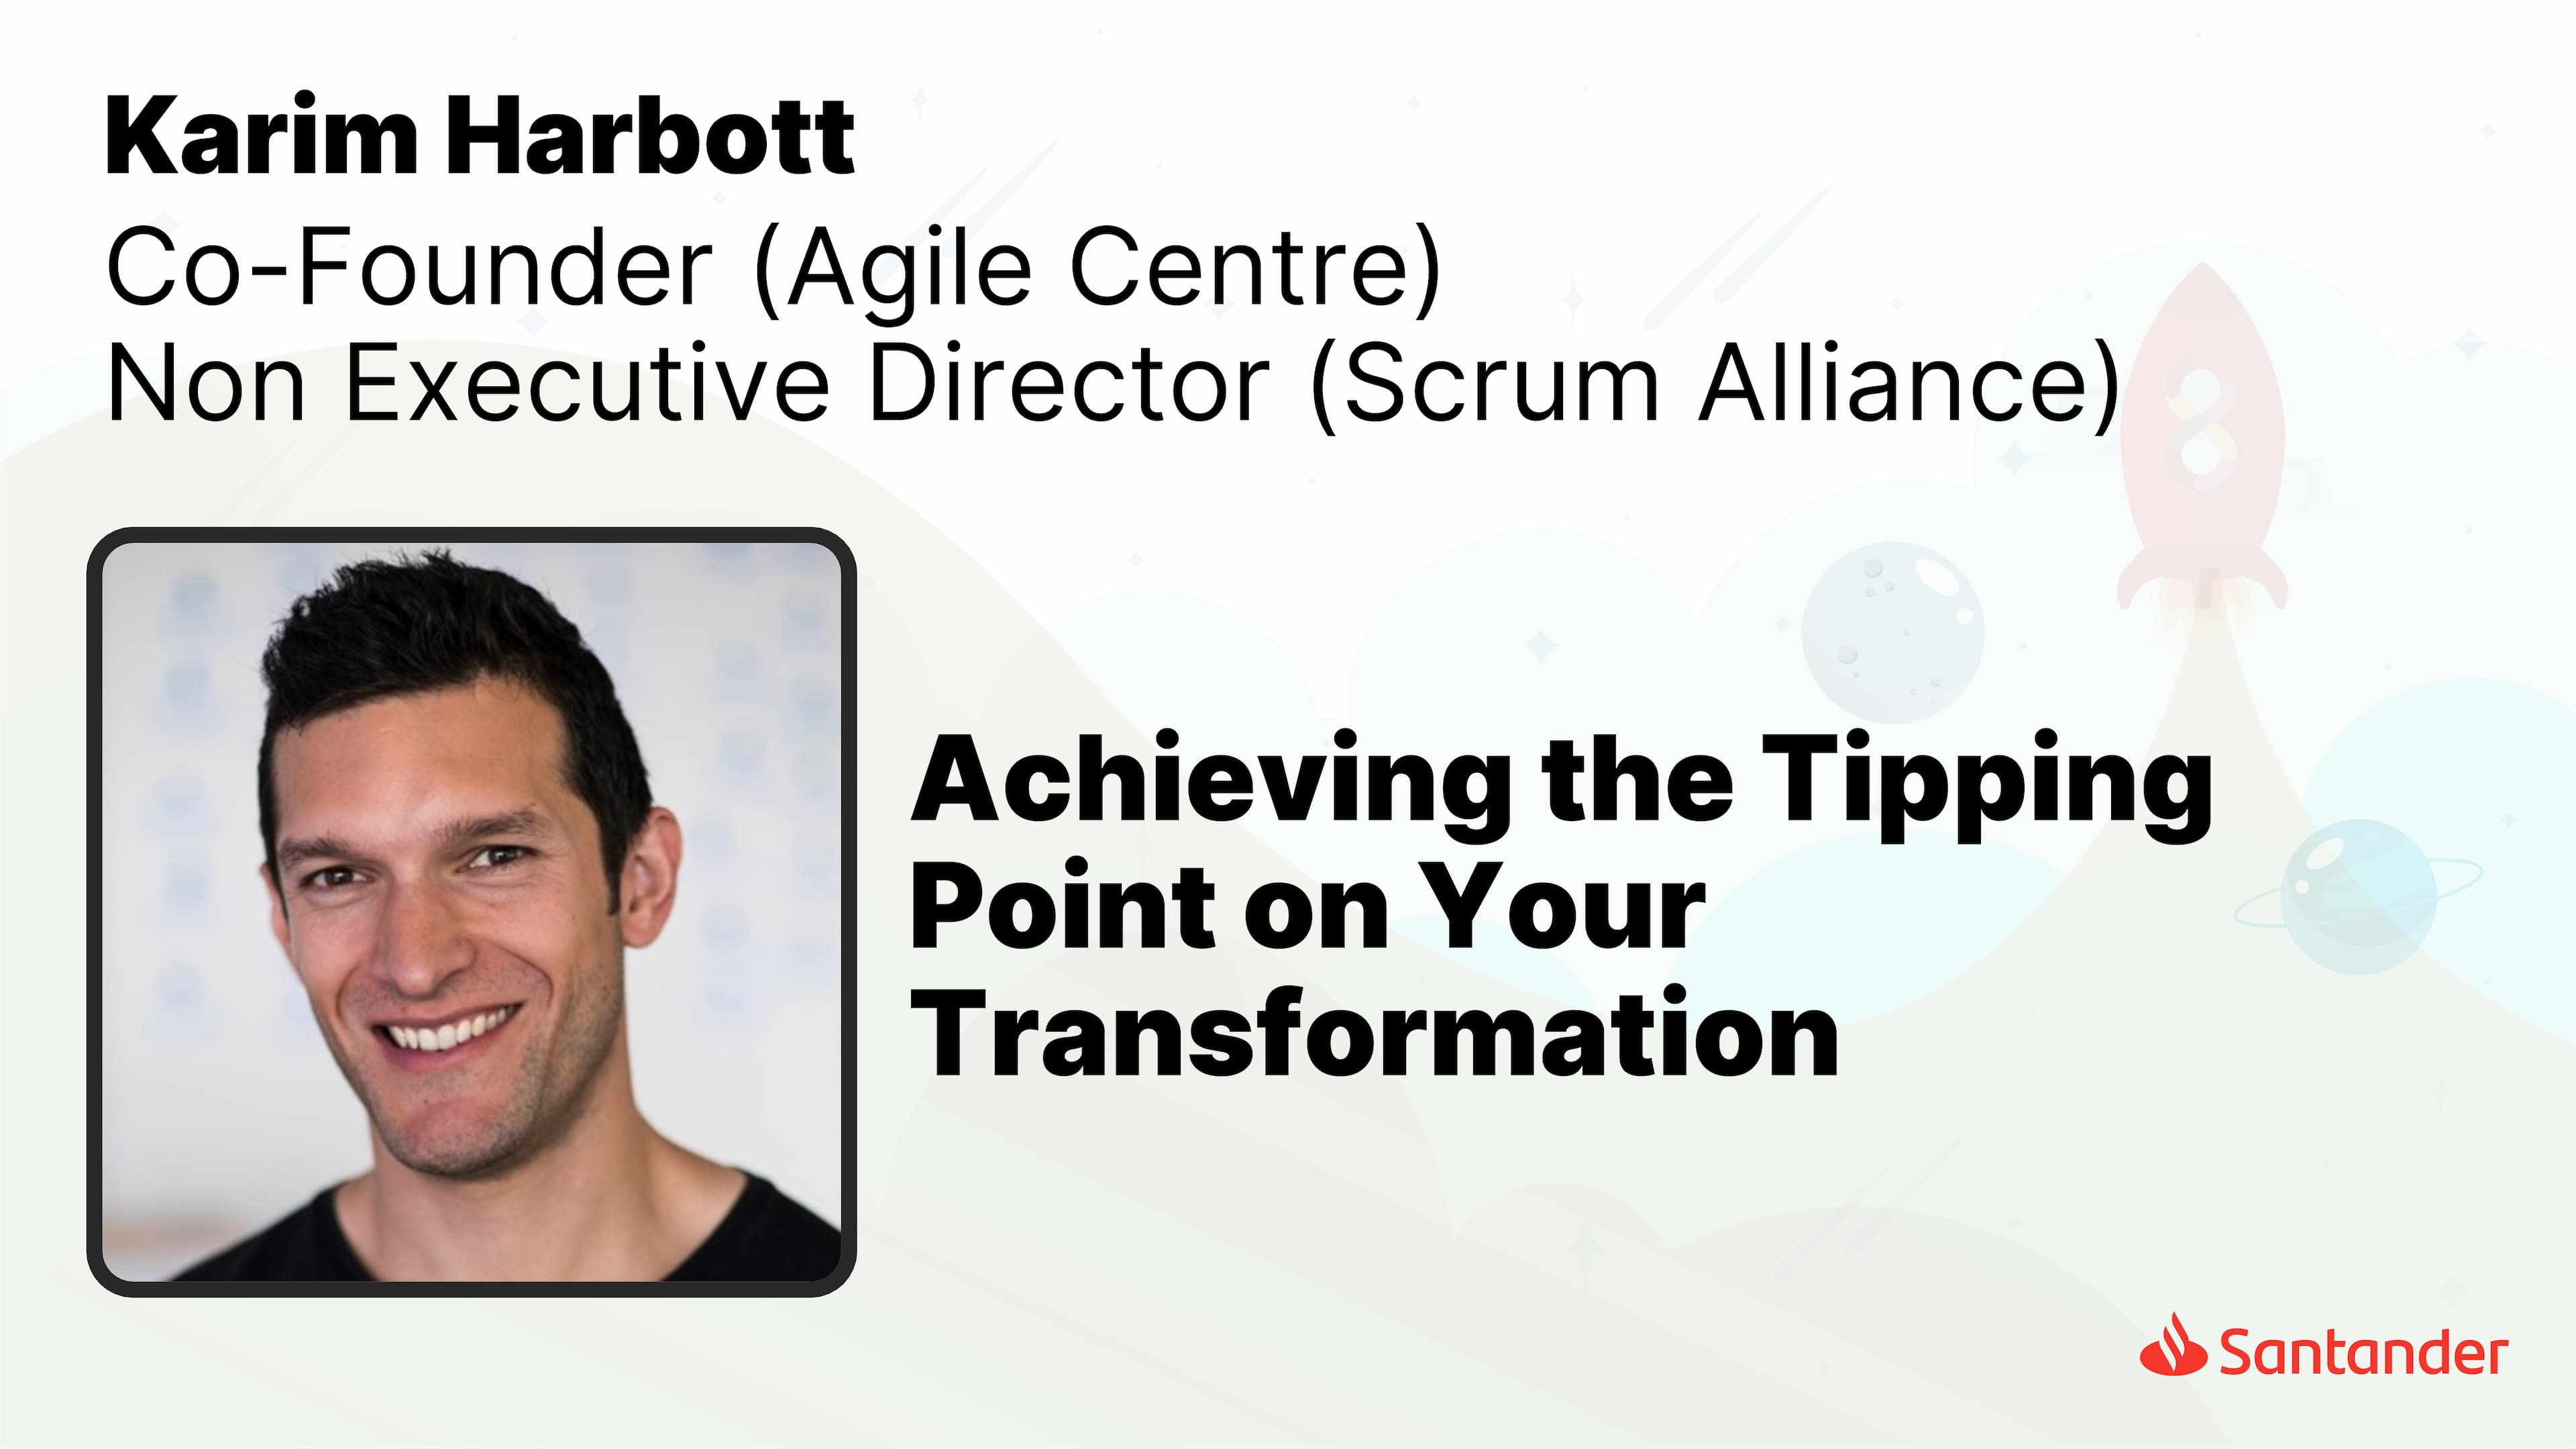 Achieving the Tipping Point on Your Transformation